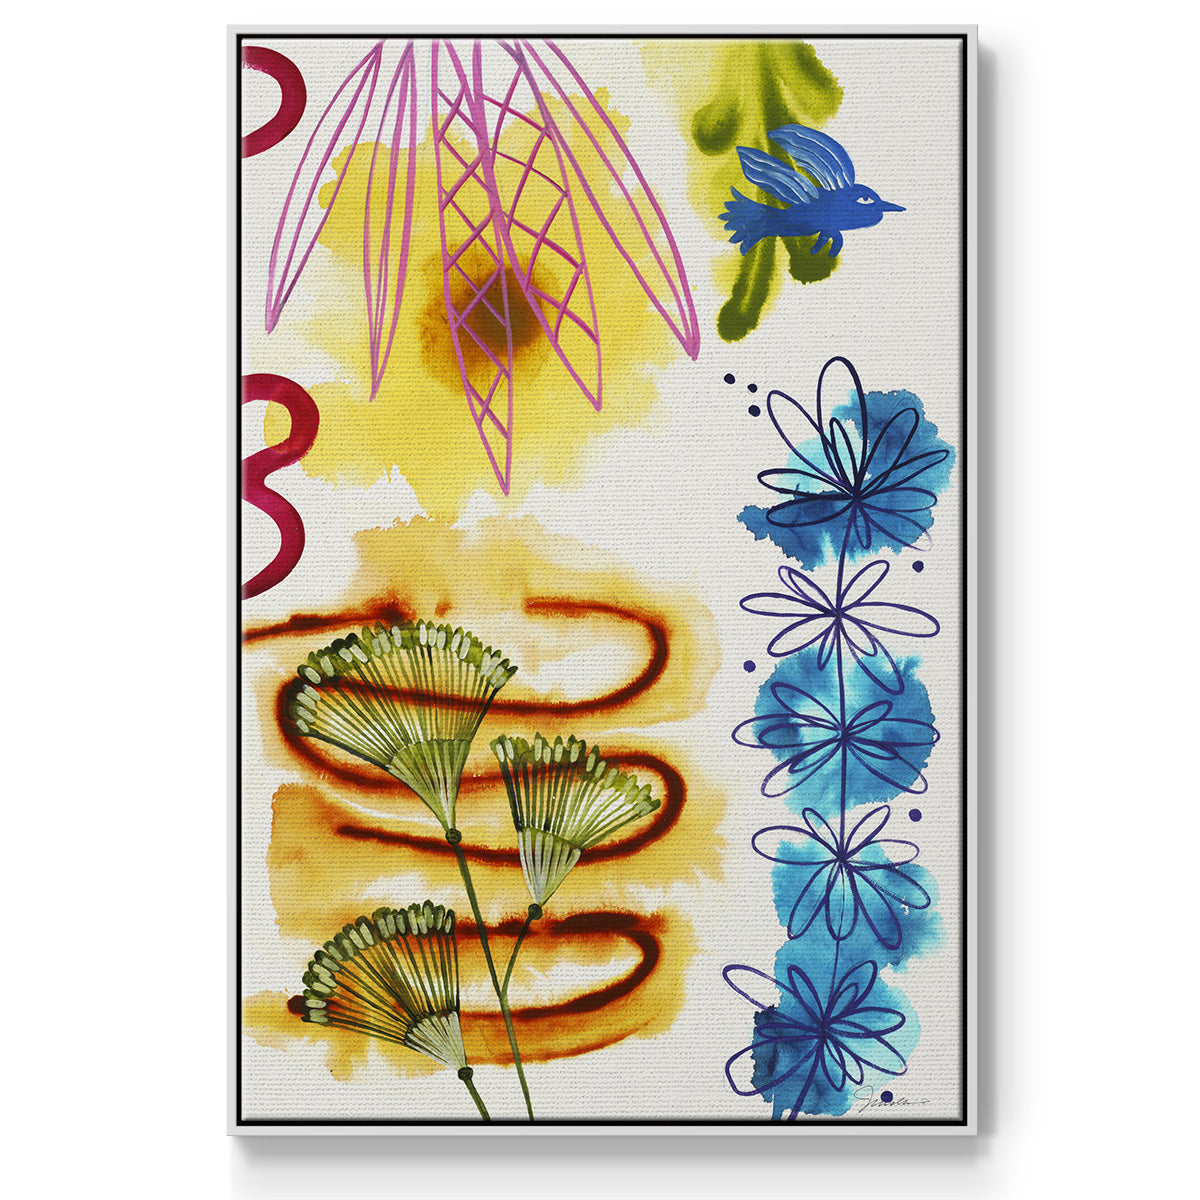 Flower Power I - Framed Premium Gallery Wrapped Canvas L Frame - Ready to Hang